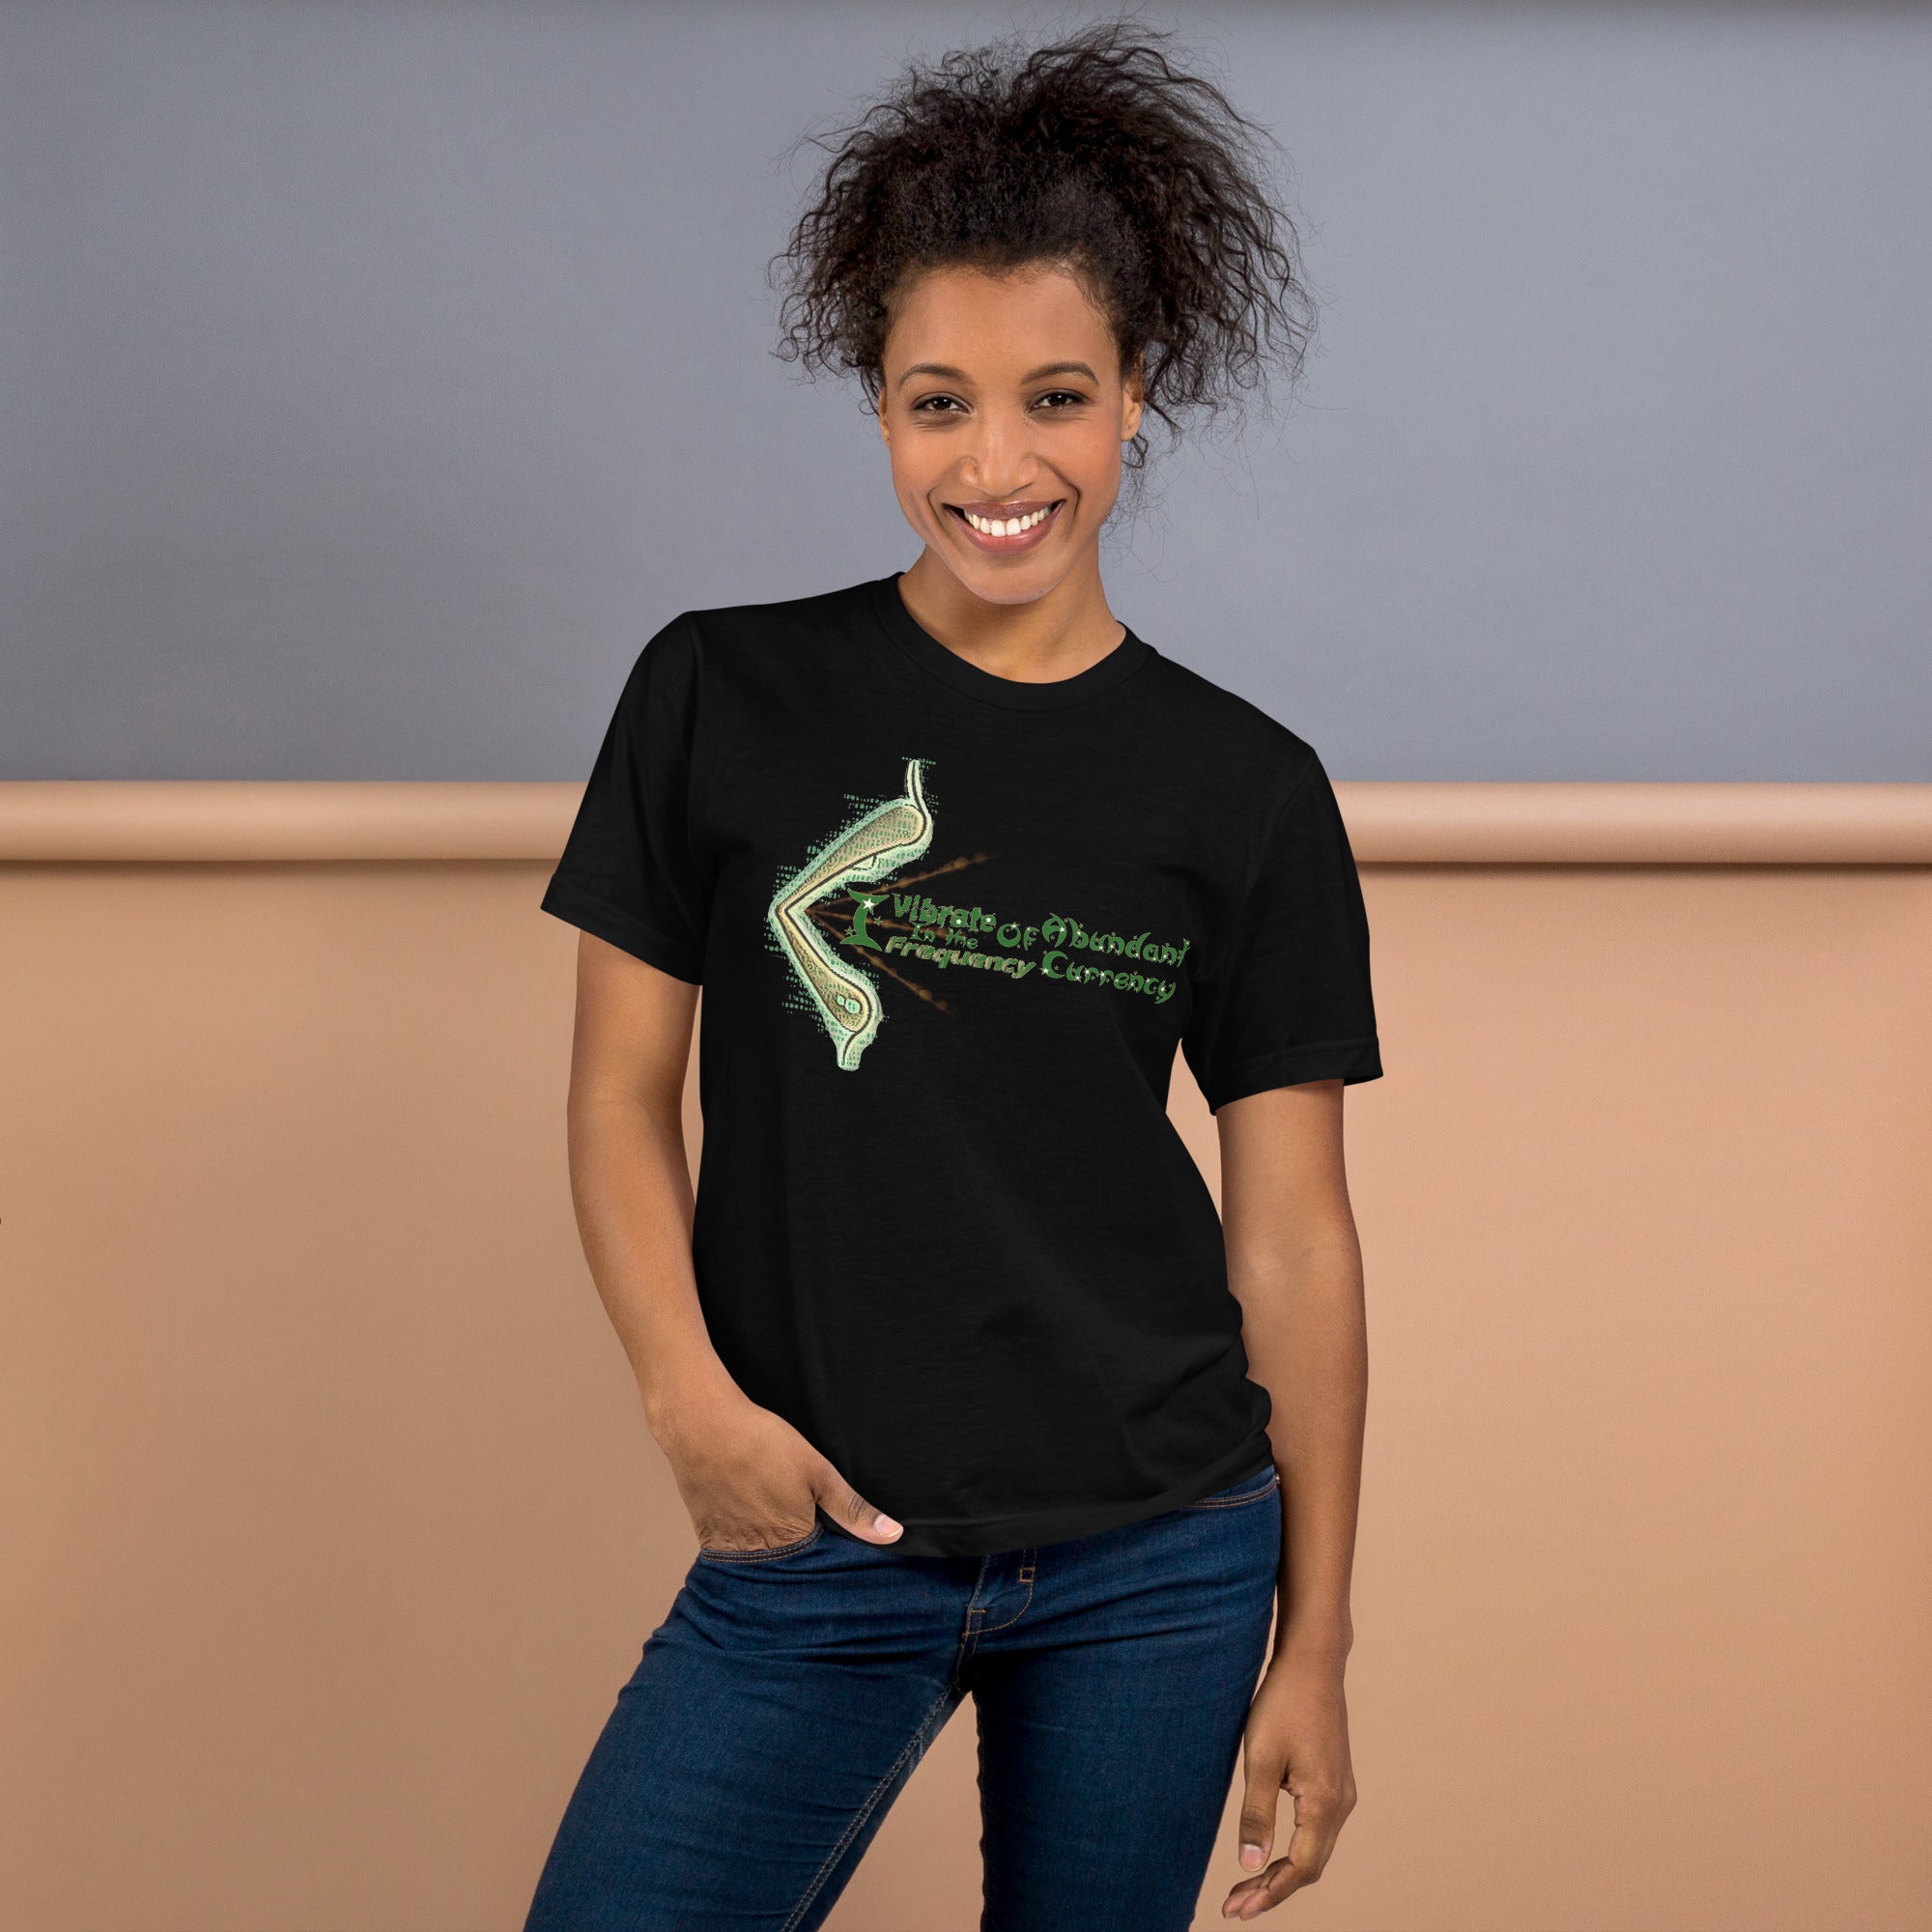 “I Vibrate in the Frequency of Abundant Currency” T-Shirt